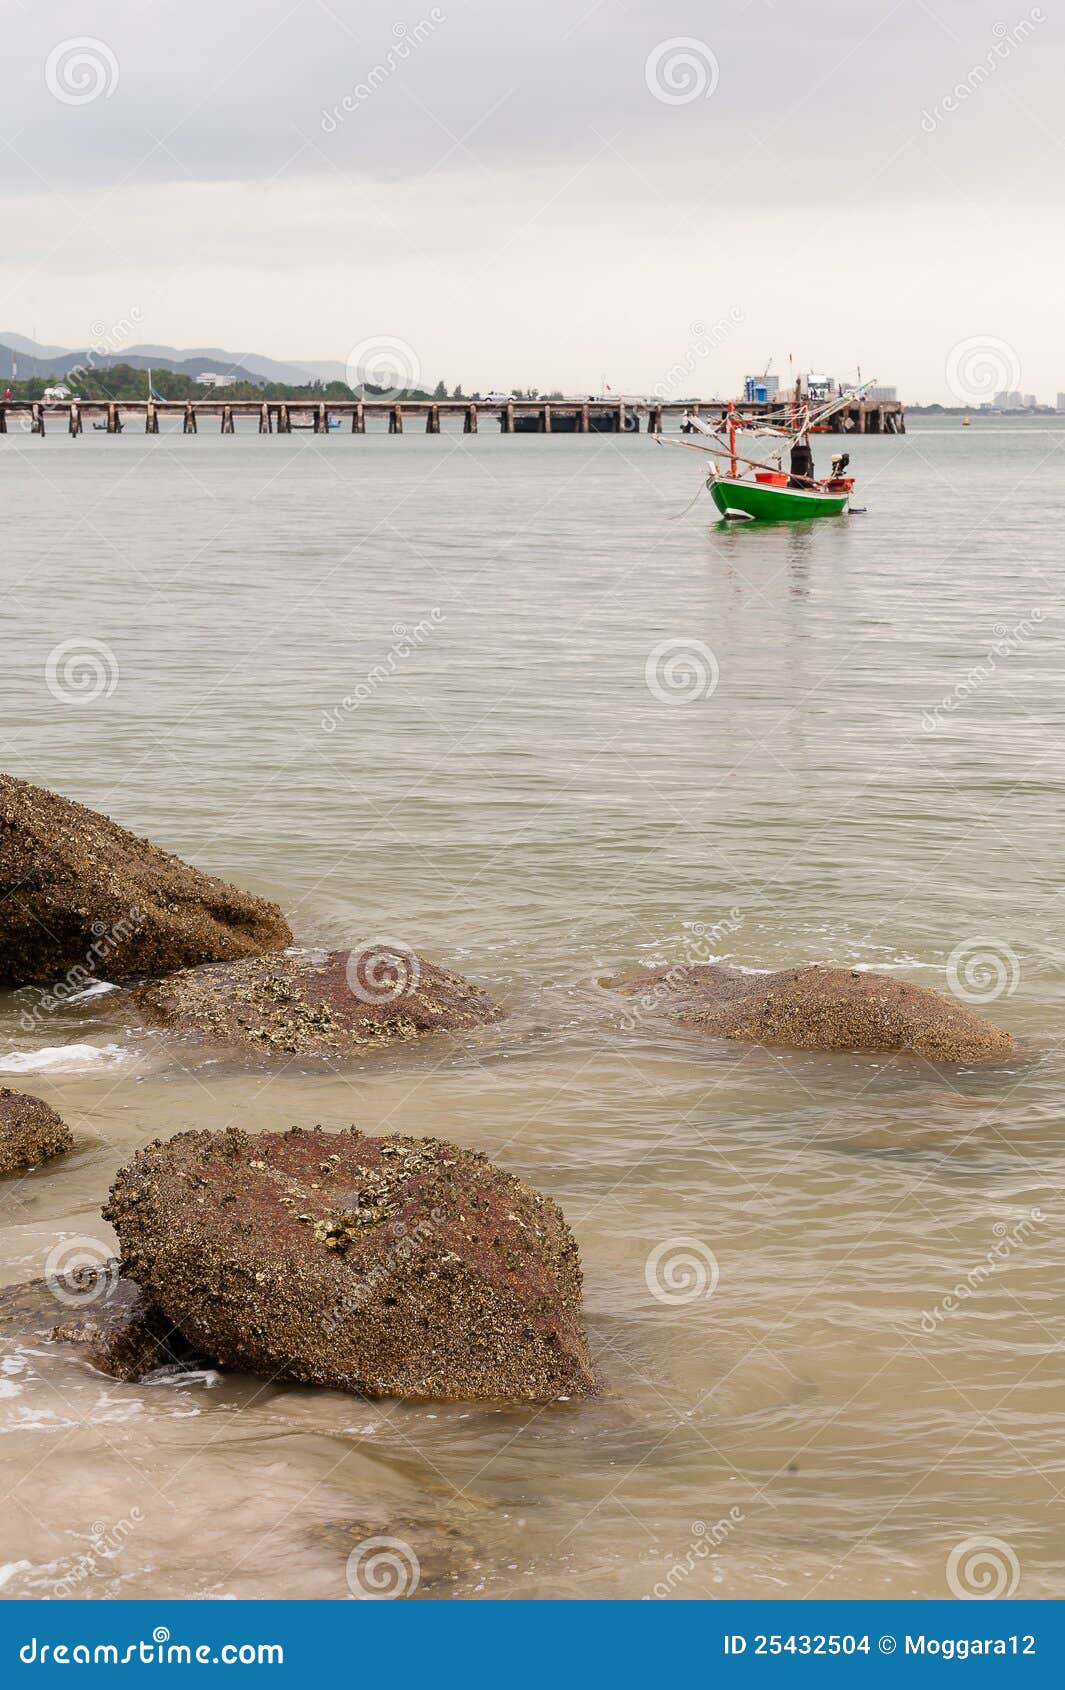 Green Fishing Boat Thai On The Sea Stock Images - Image: 25432504